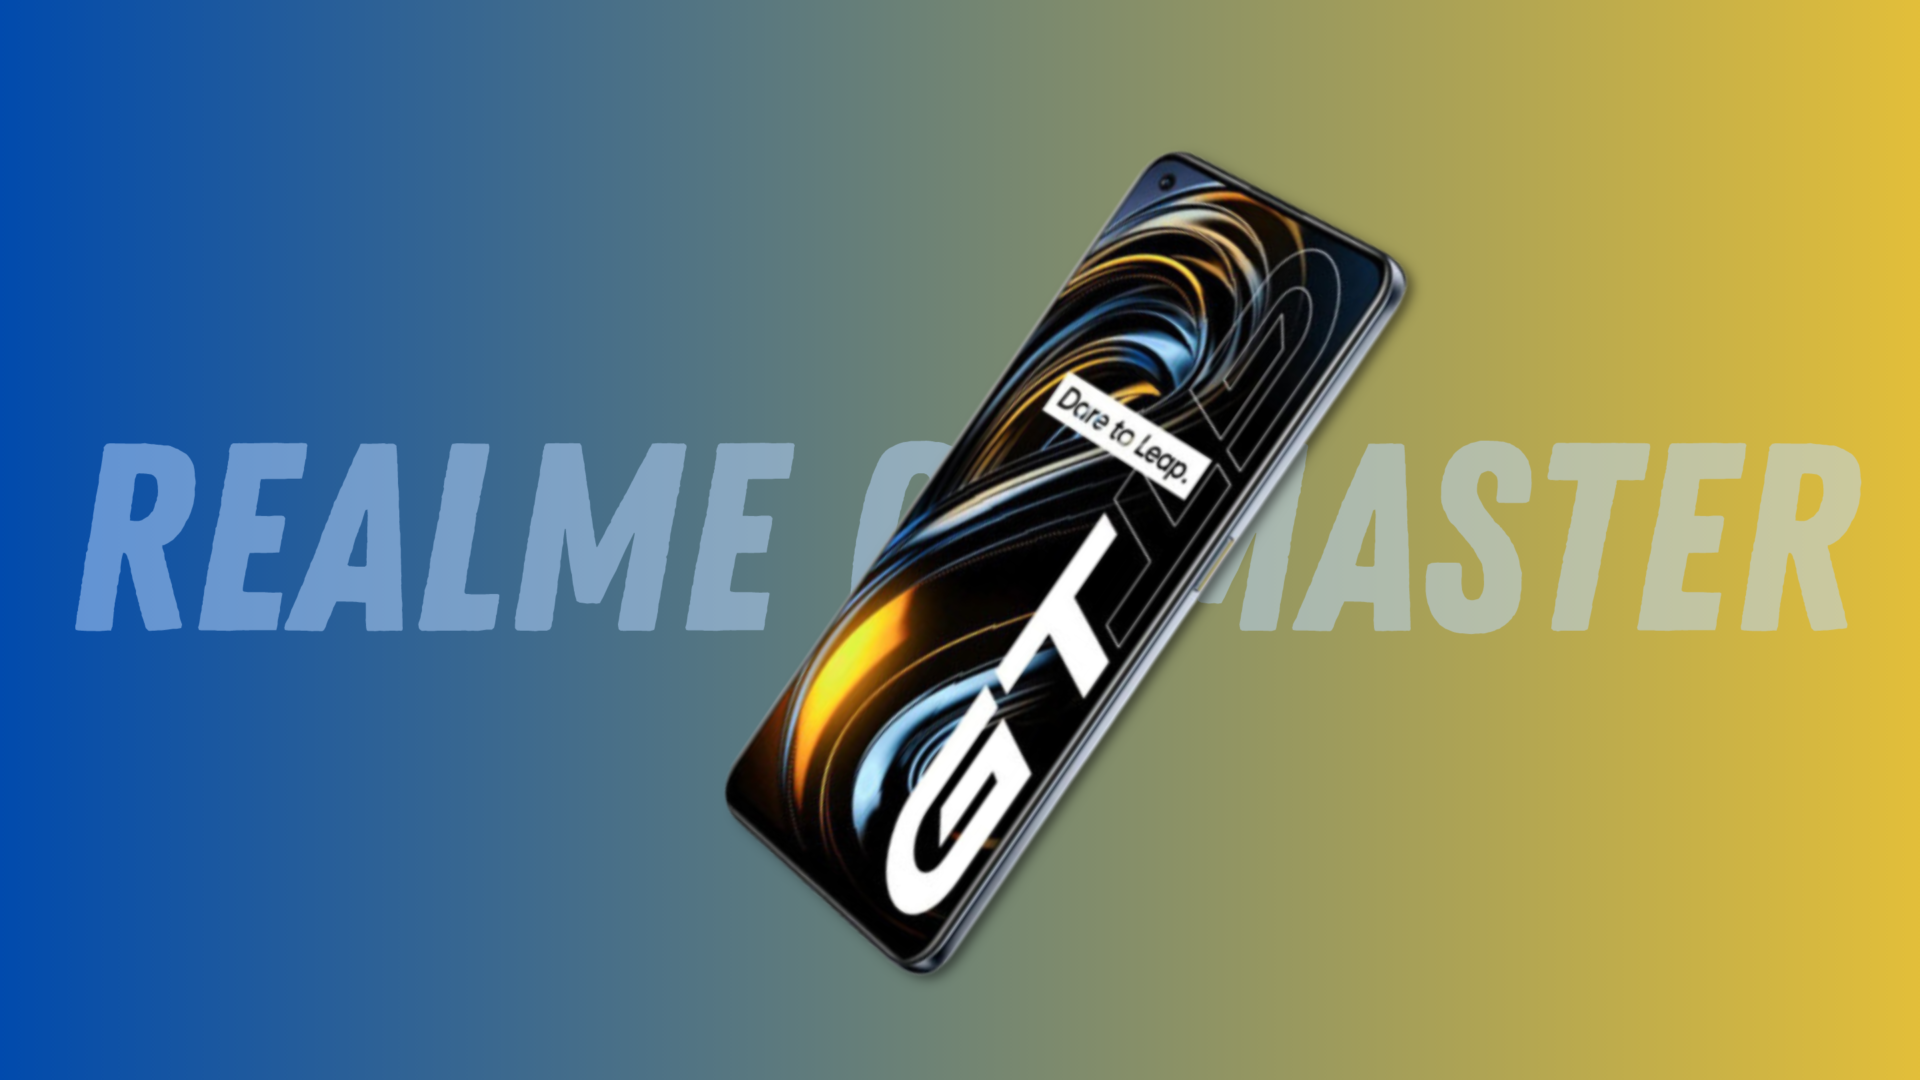 Realme GT Master Edition to arrive on July 21; Full specs leaks online